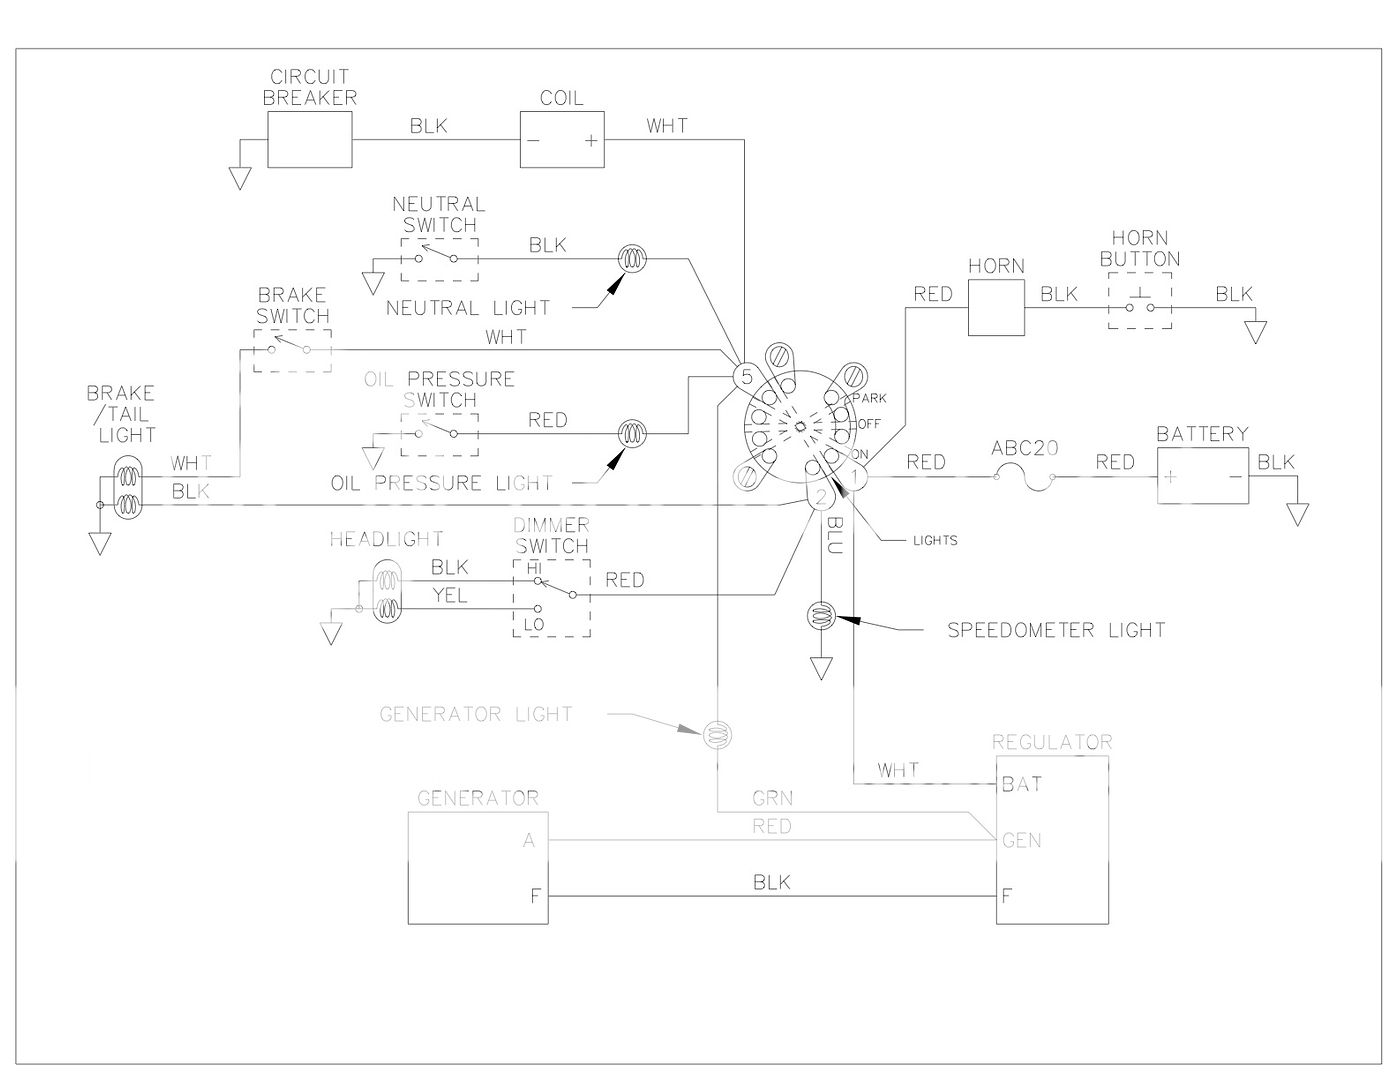 Need a simplified 5 Pole Ignition Switch Wiring Diagram ... 11 pole magneto wiring diagram 